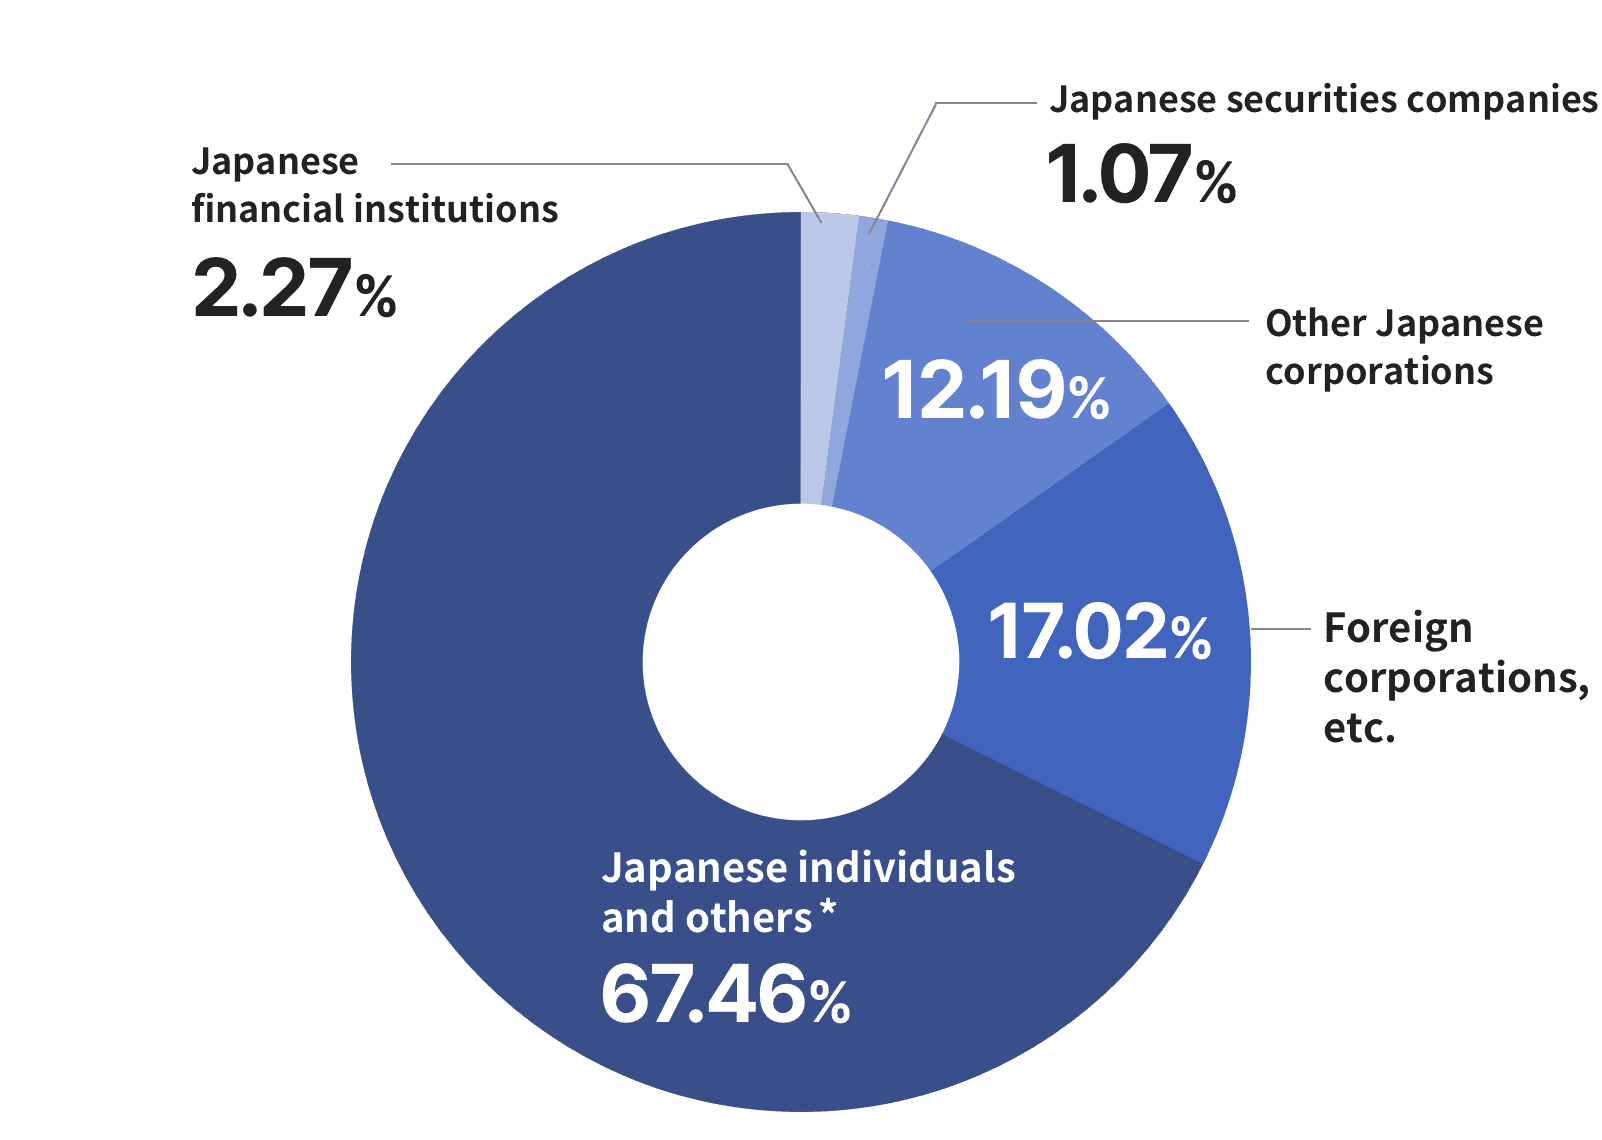 Distribution of ownership among shareholders Japanese financial institutions 1.48%、Japanese securities companies2.50%、Other Japanese corporations1.35%、Foreign corporations, etc. 18.46%、Japanese individuals and others76.20%